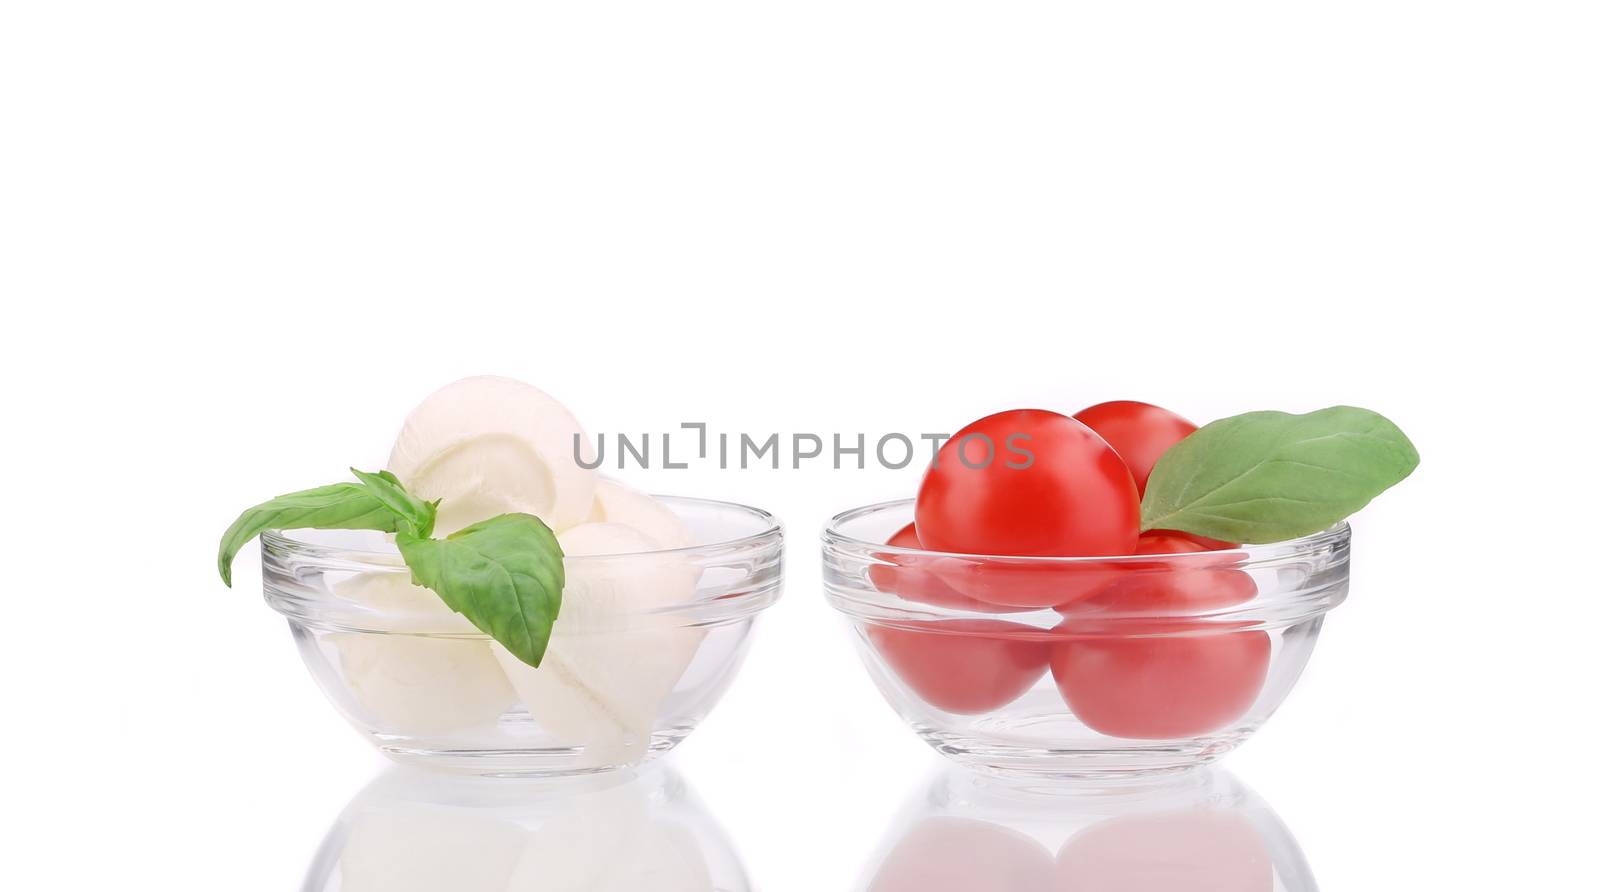 Mozzarella and tomatoes in glass bowl. Isolated on a white background.